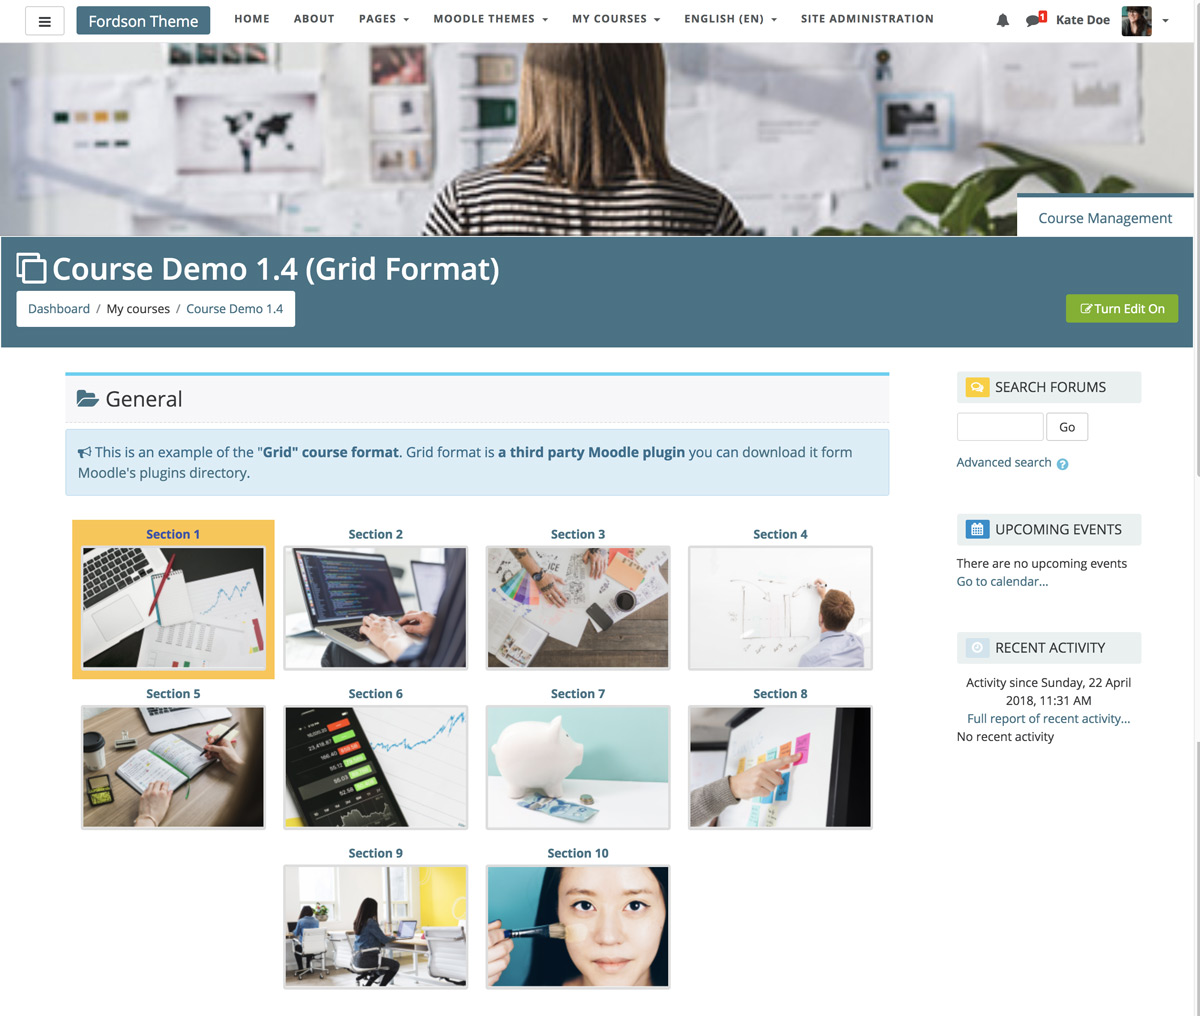 moodle-theme-fordson-theme-frontpage-for-loggedin-users